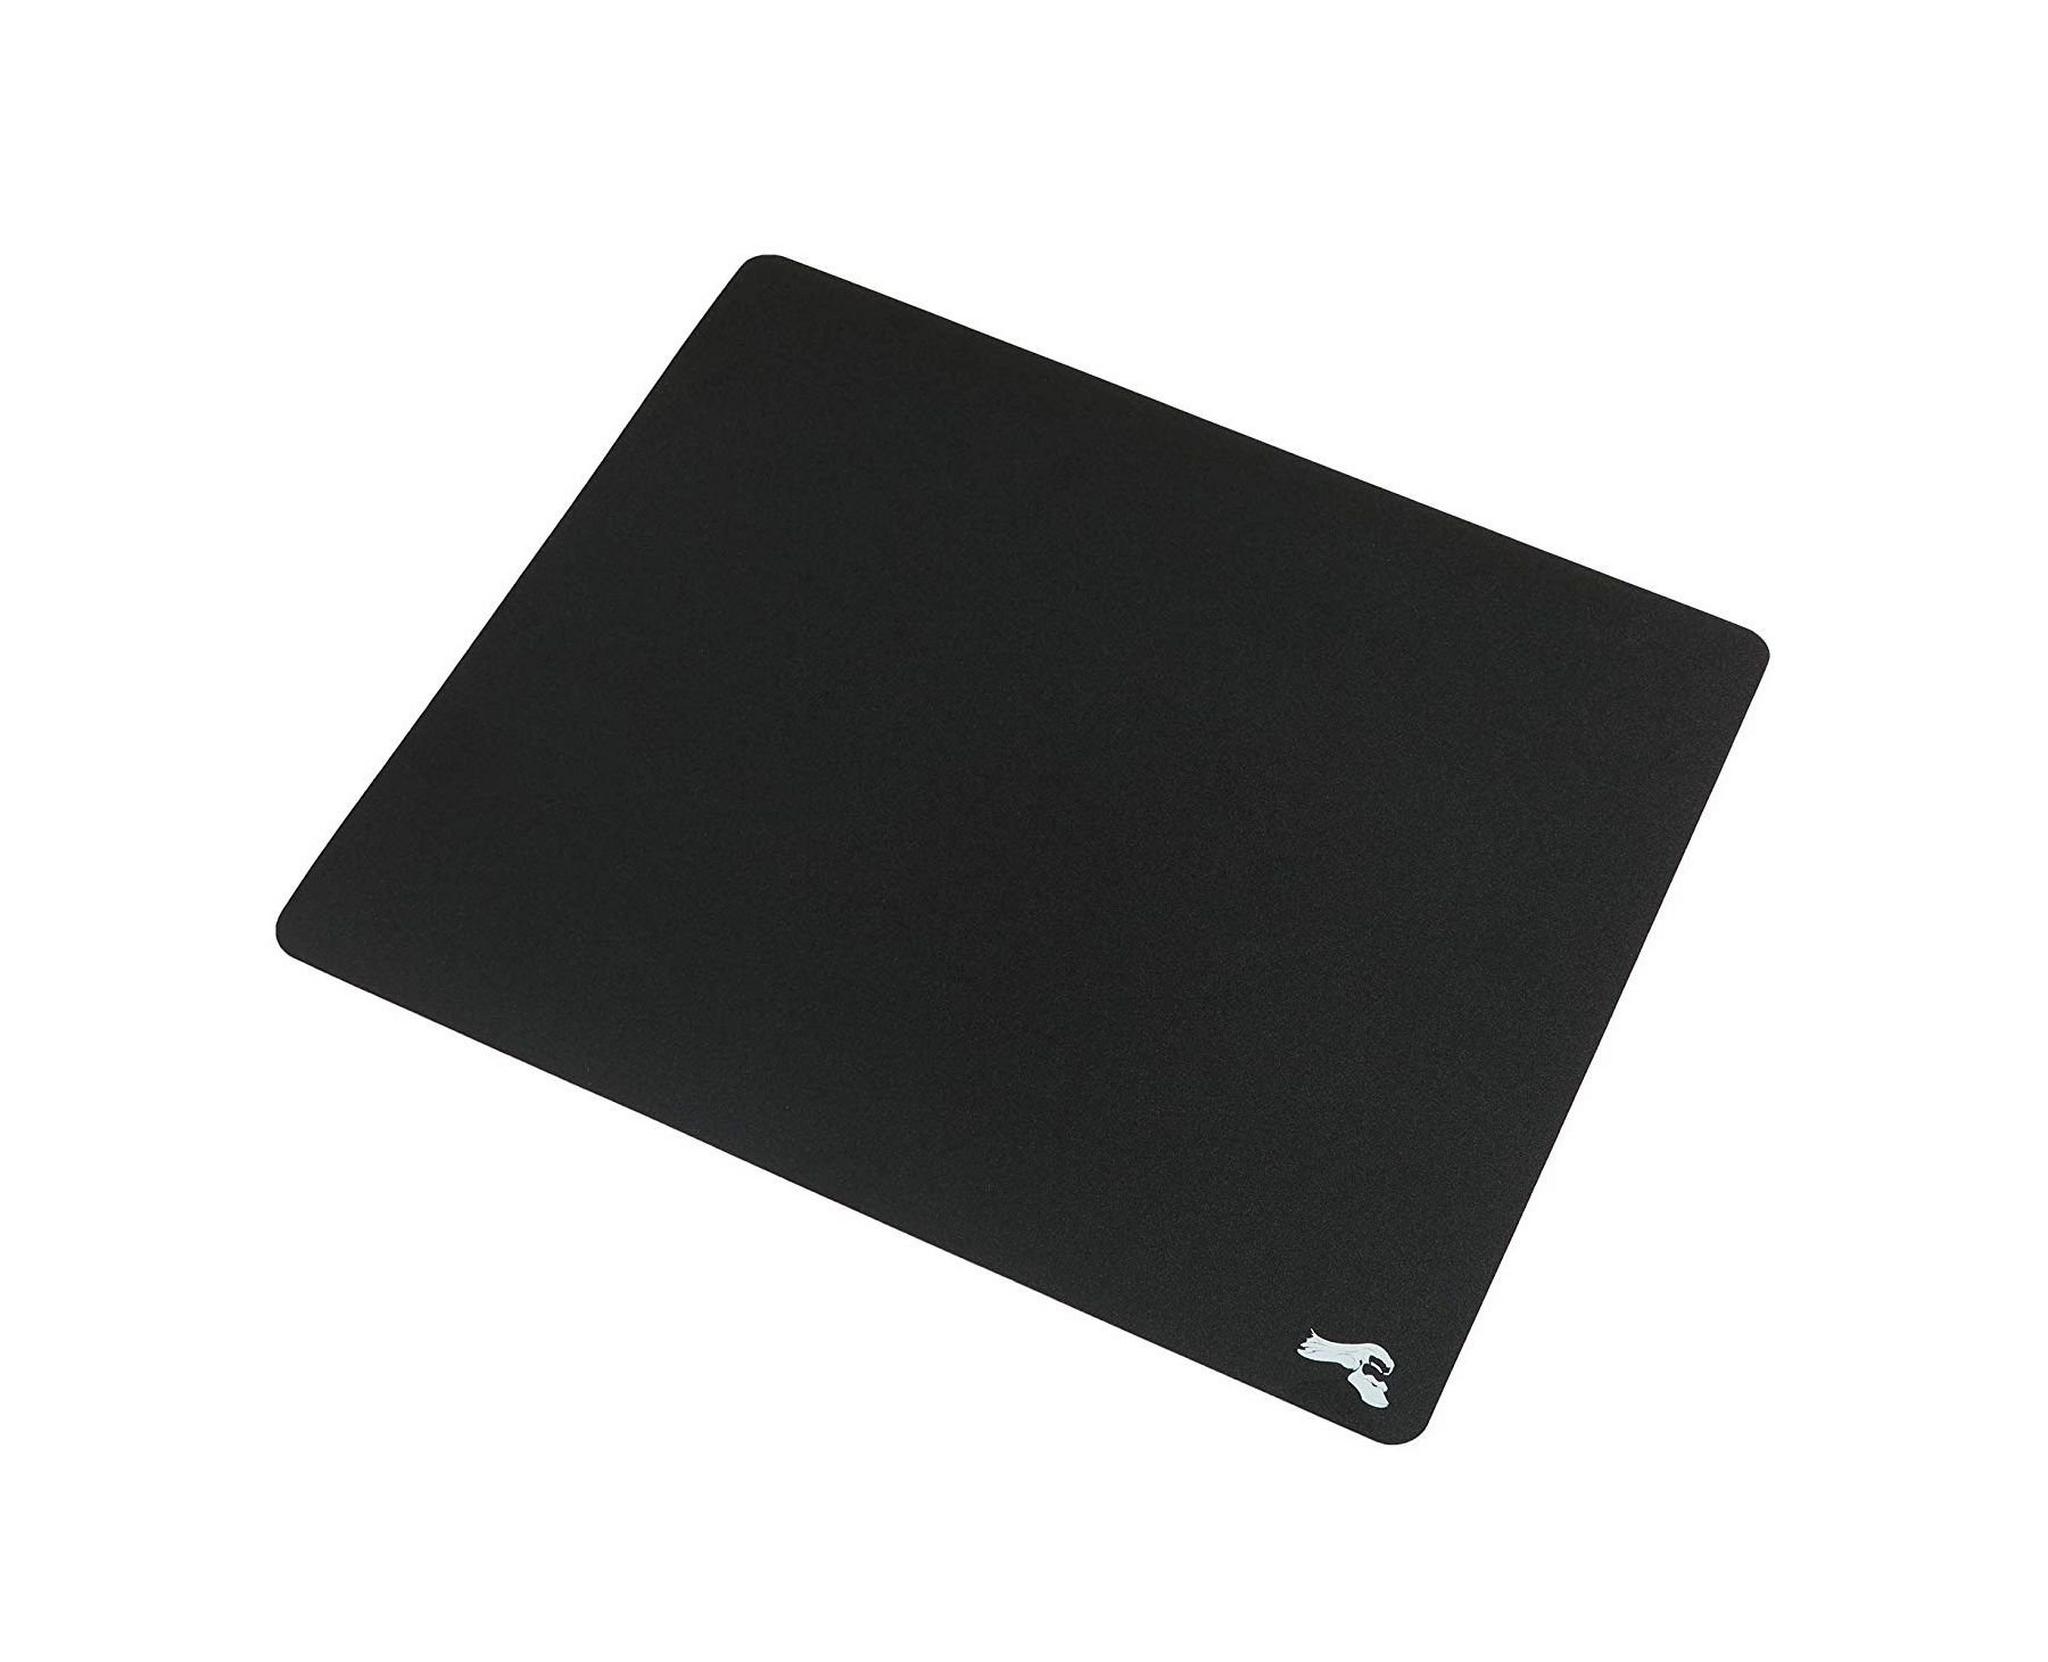 Glorious Helios Extra Large Mouse Pad - Black